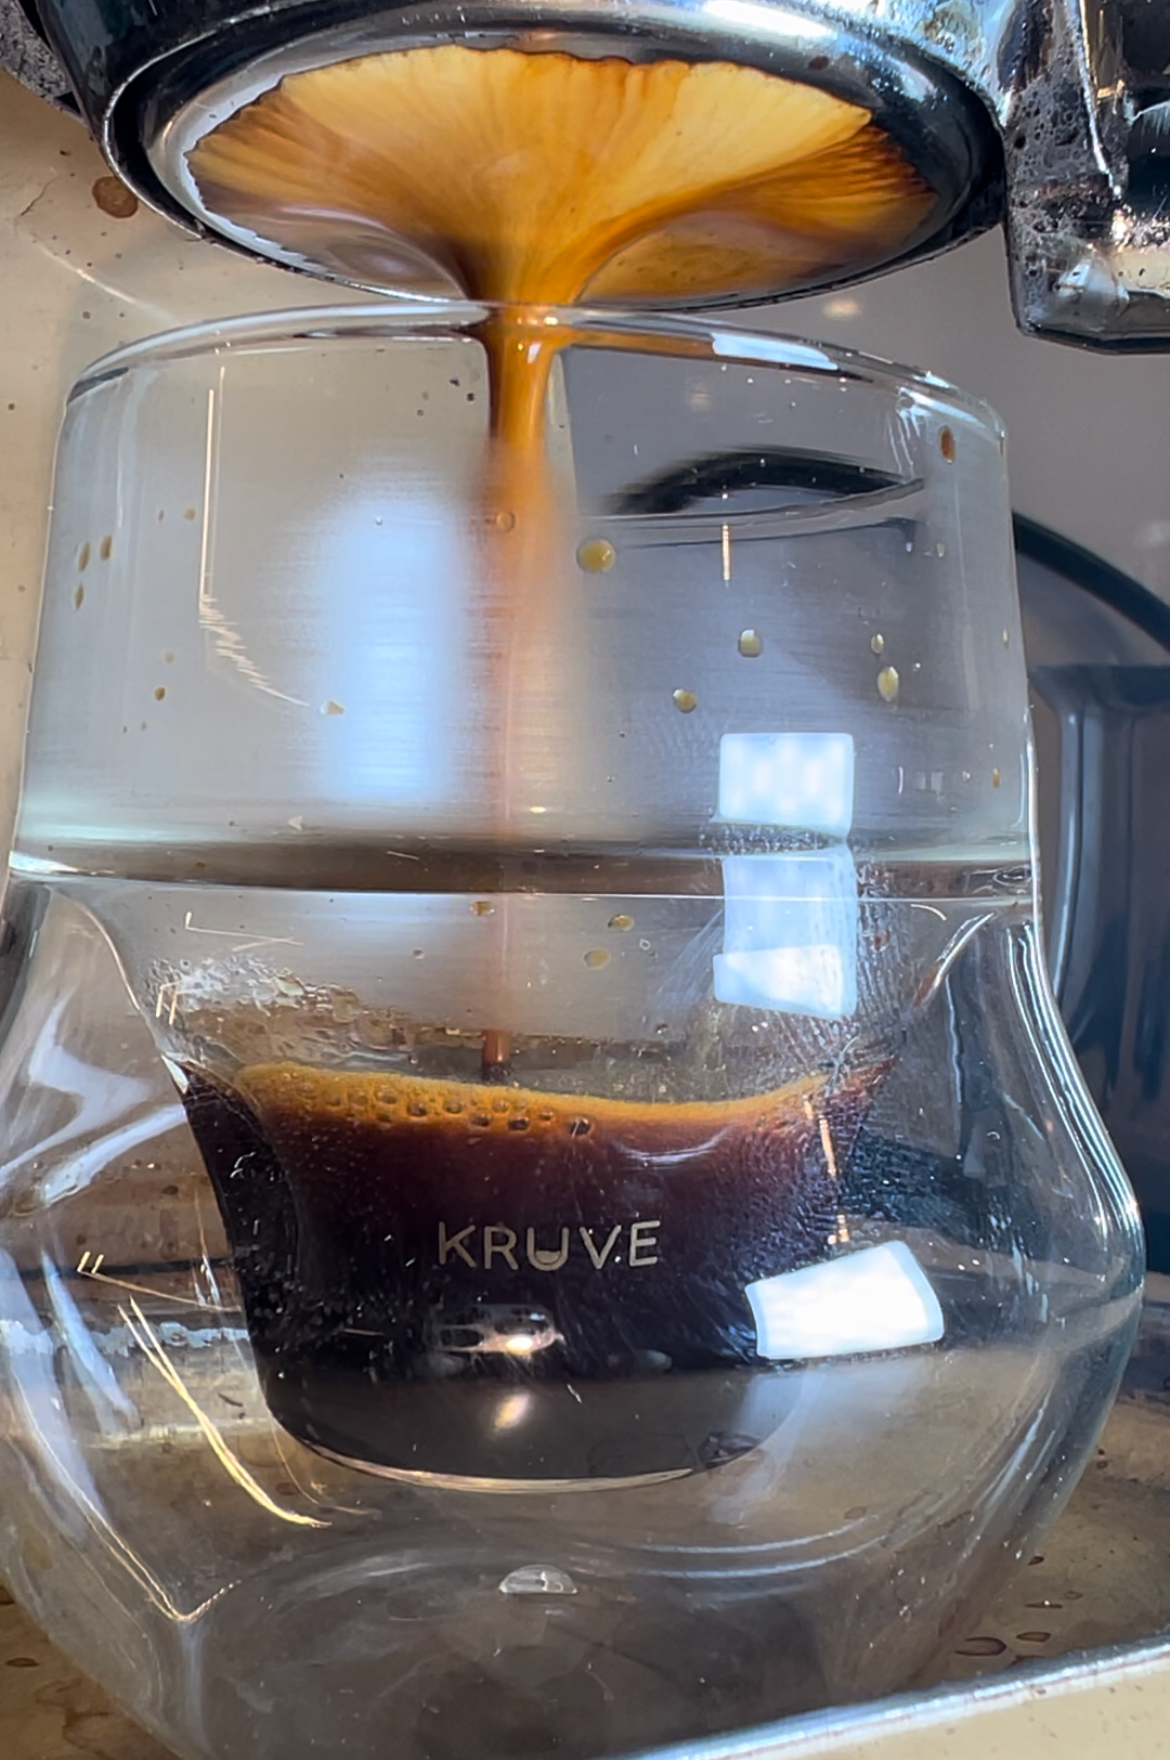 Evaluating the Kruve EQ Cup for Espresso | by Robert McKeon Aloe | Towards  Data Science